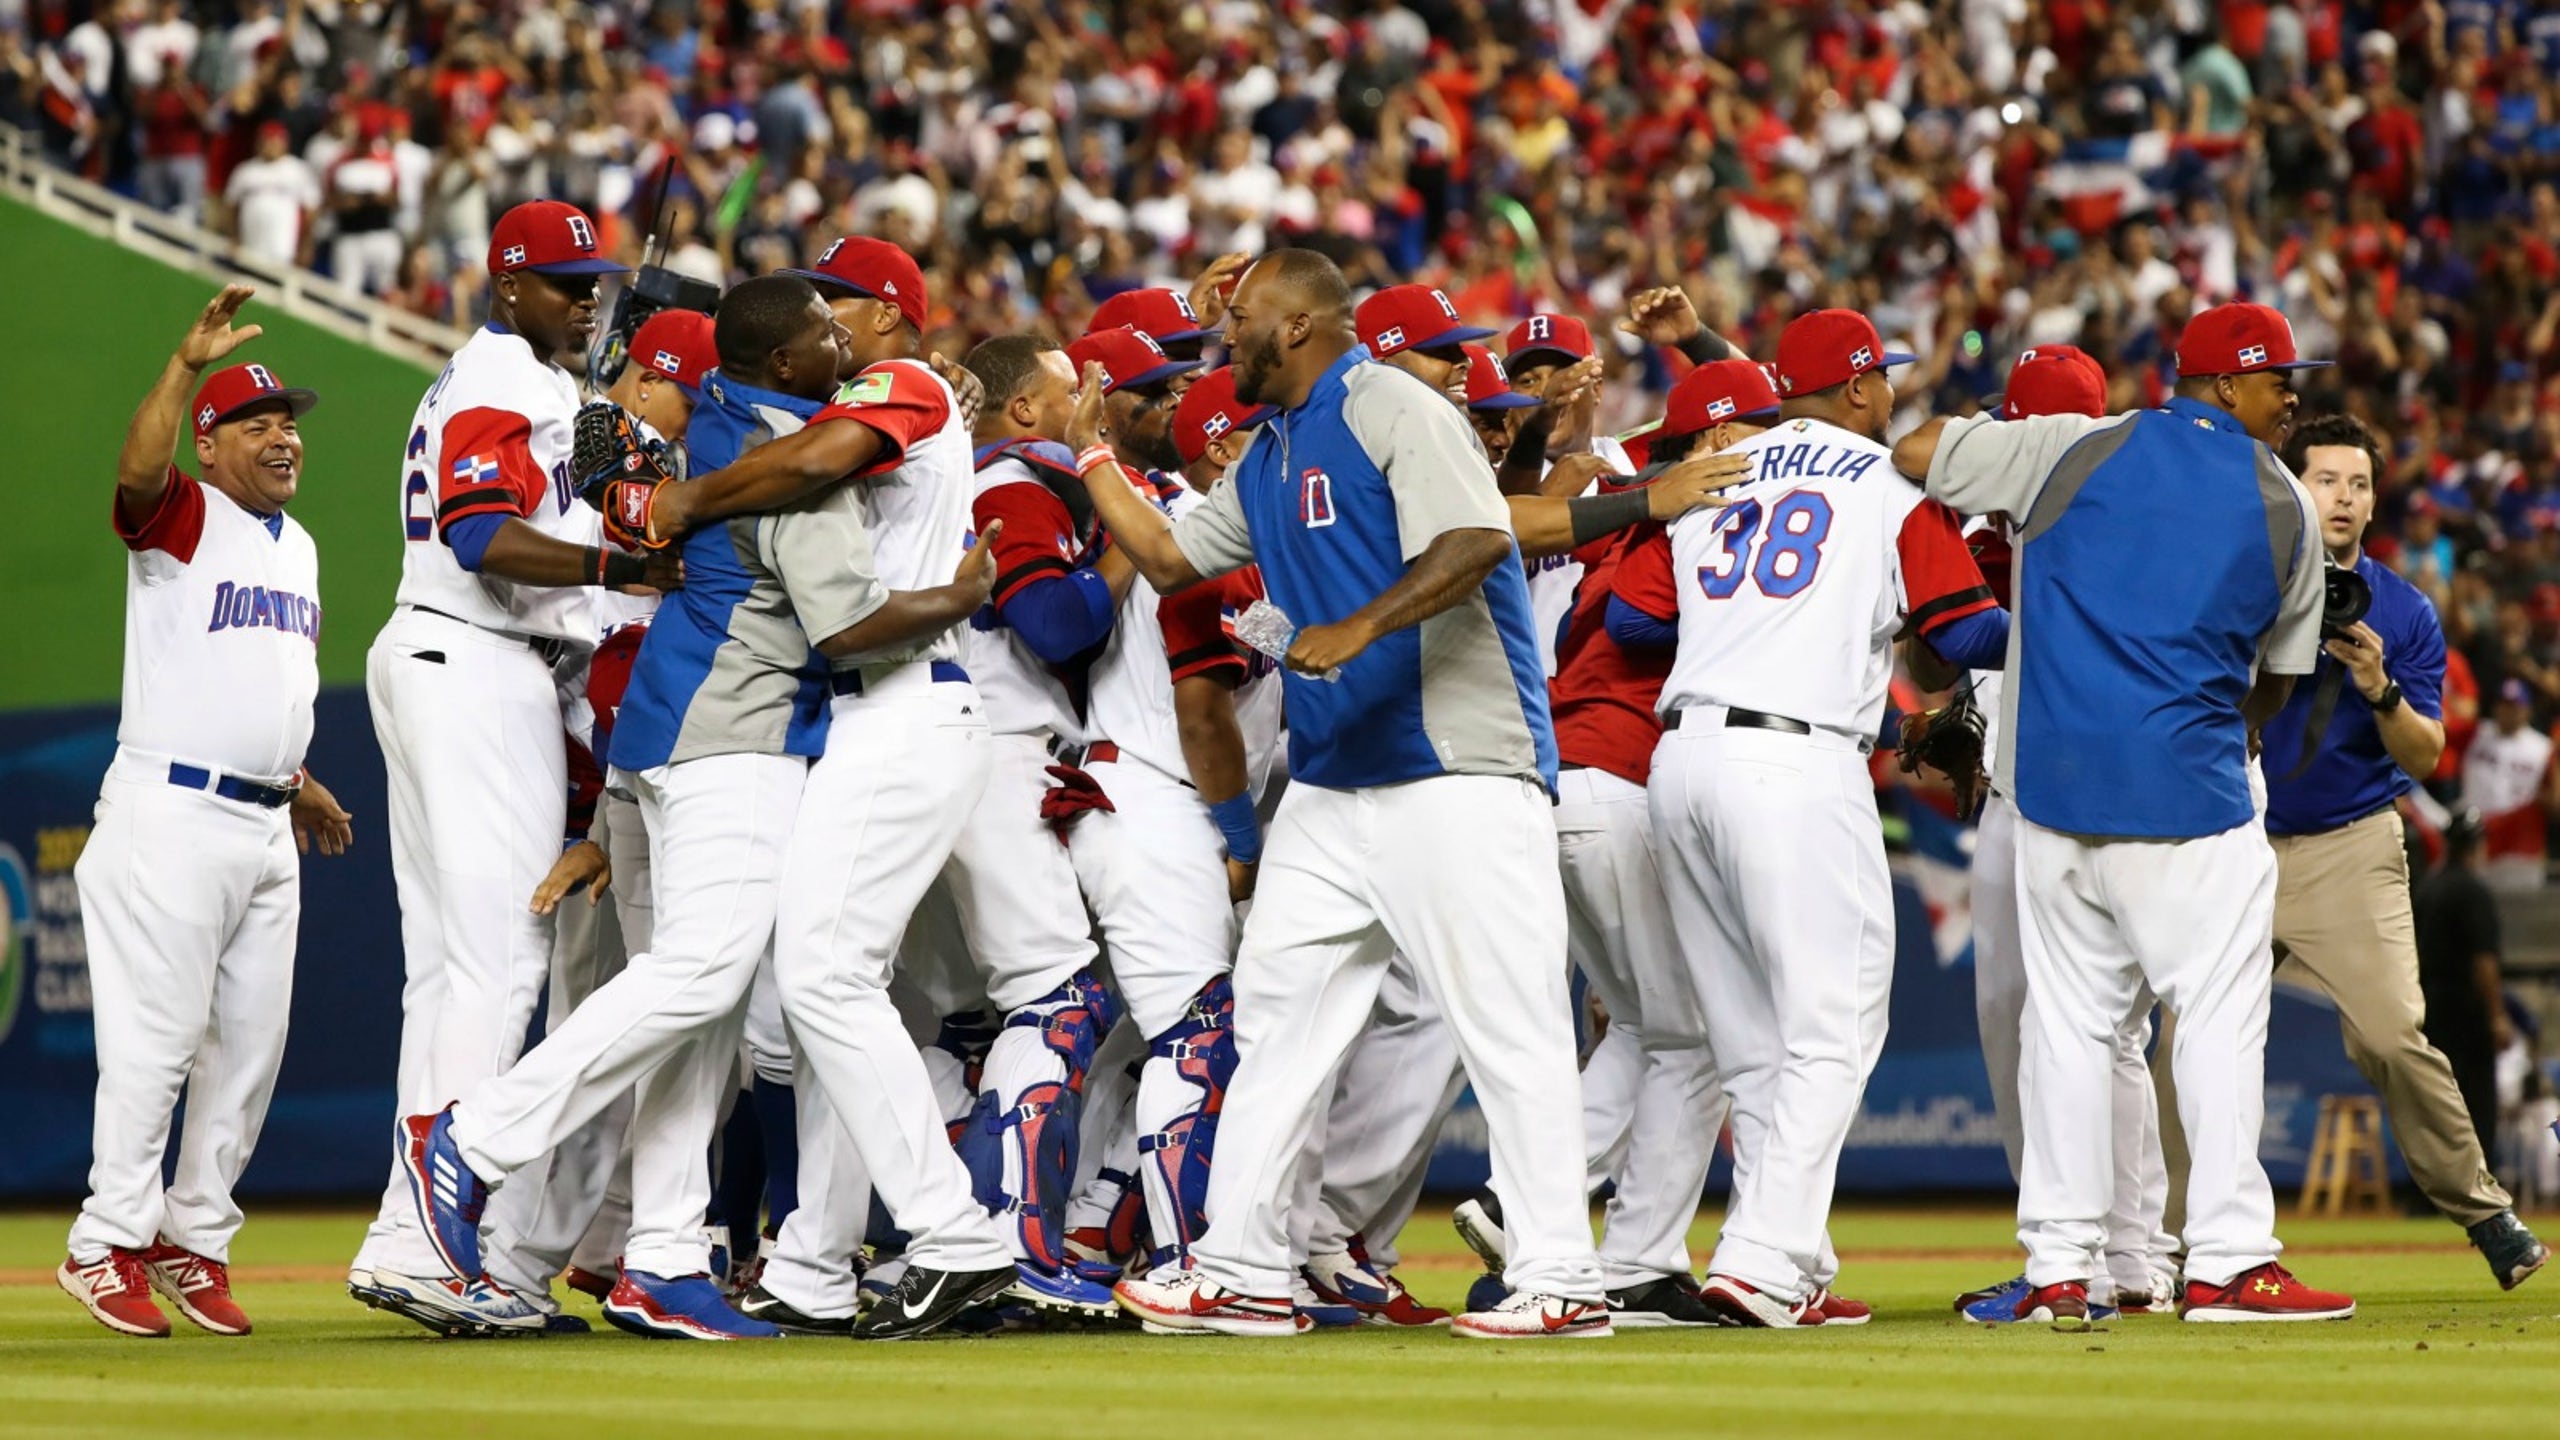 Dominican Republic and its fans electrify World Baseball Classic FOX